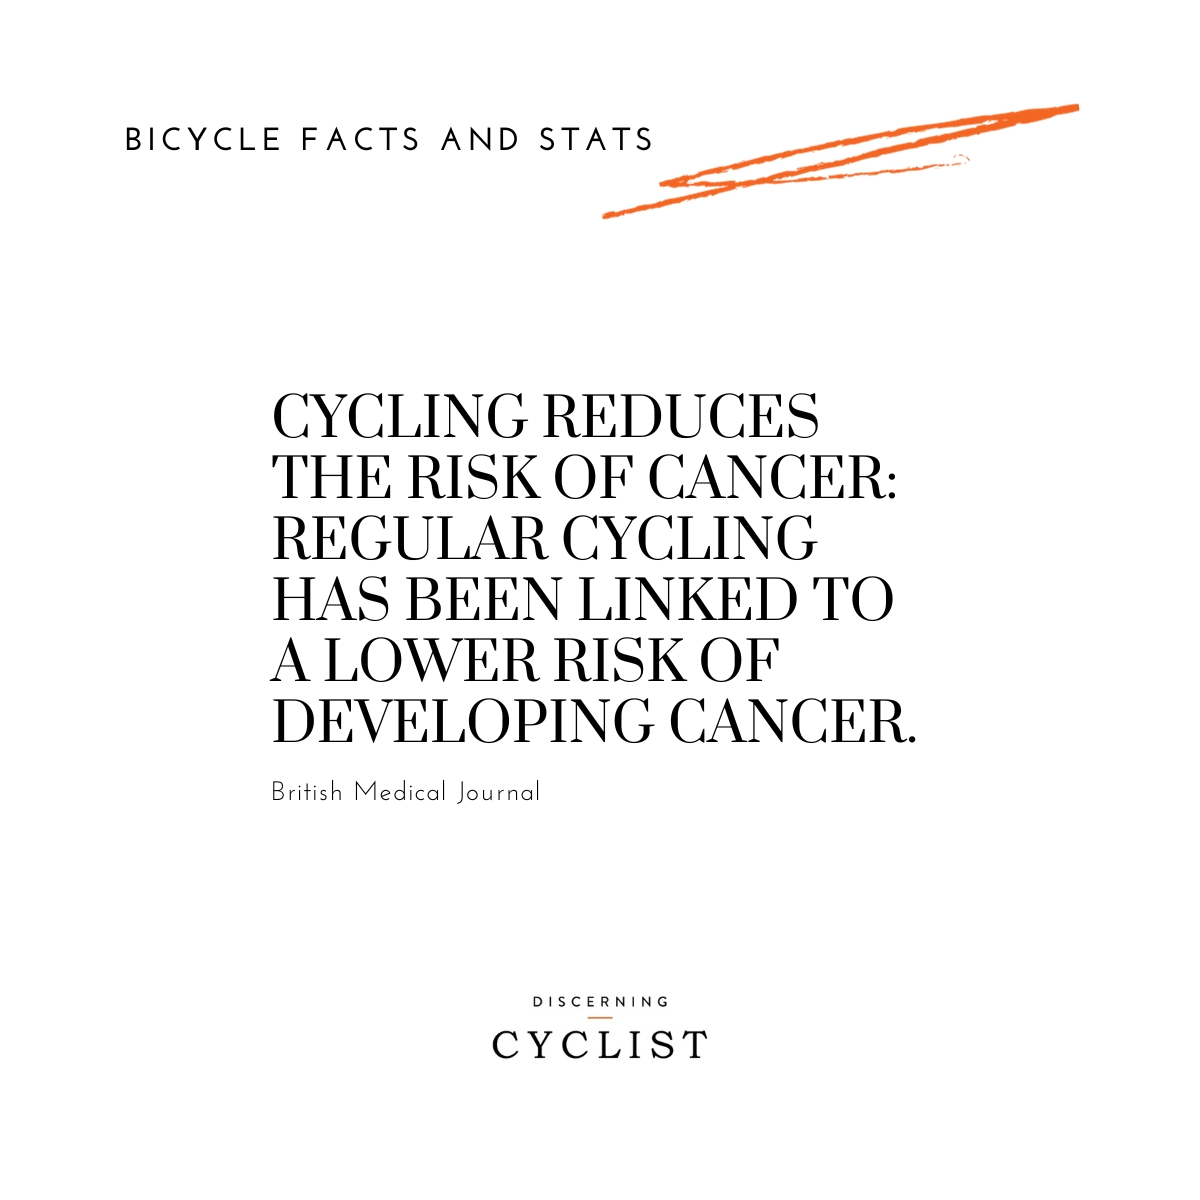 Cycling Reduces the Risk of Cancer: Regular cycling has been linked to a lower risk of developing cancer.